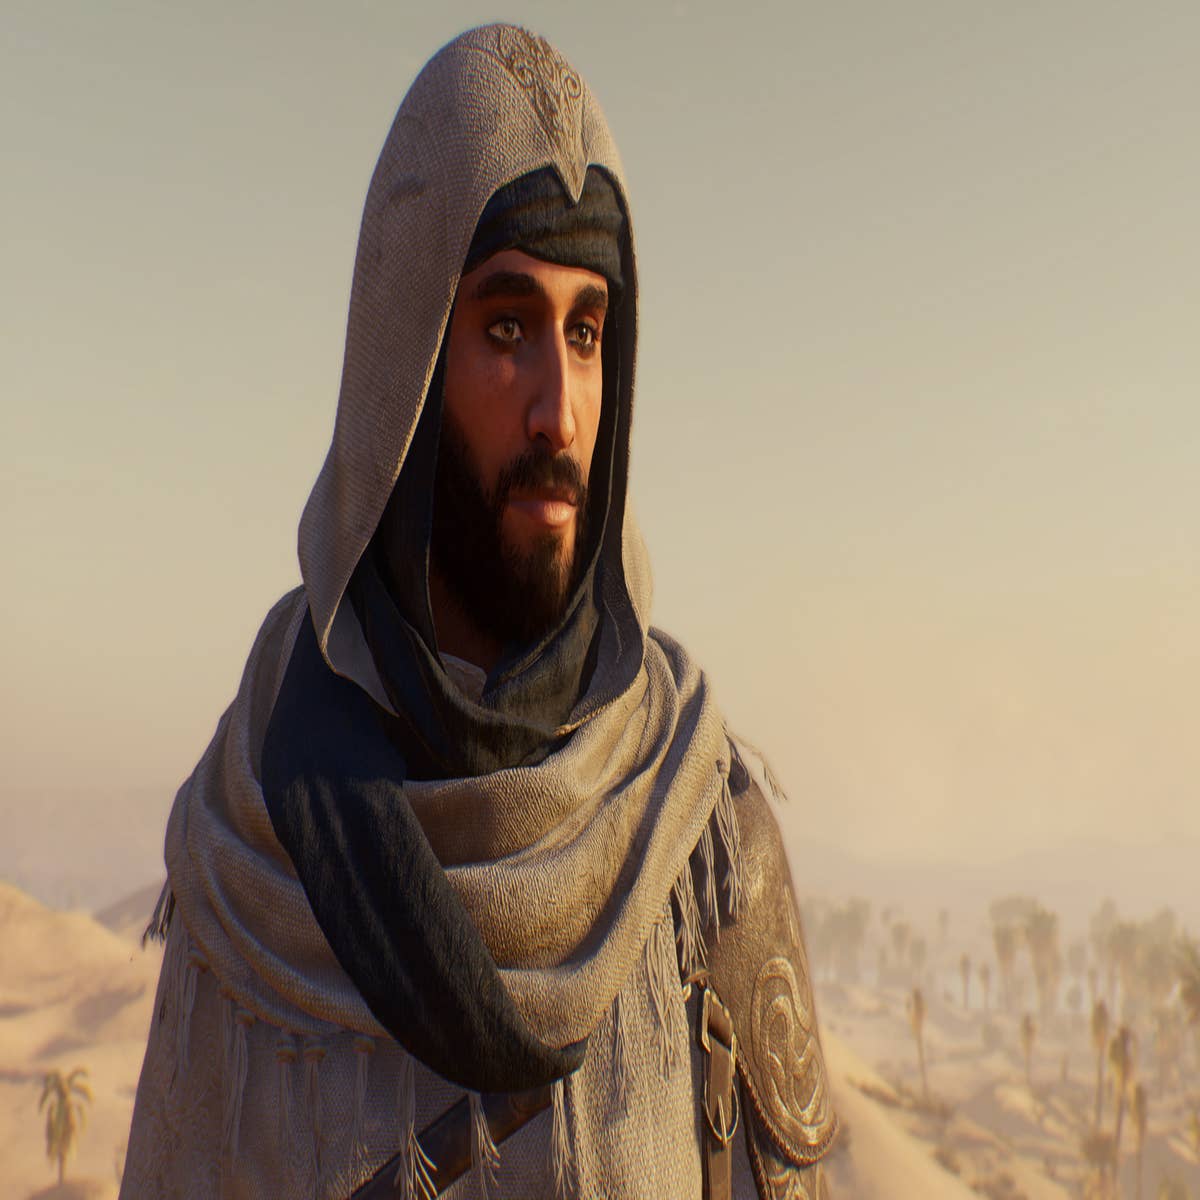 Assassin's Creed Mirage system requirements - minimum and recommended specs  - PC Guide